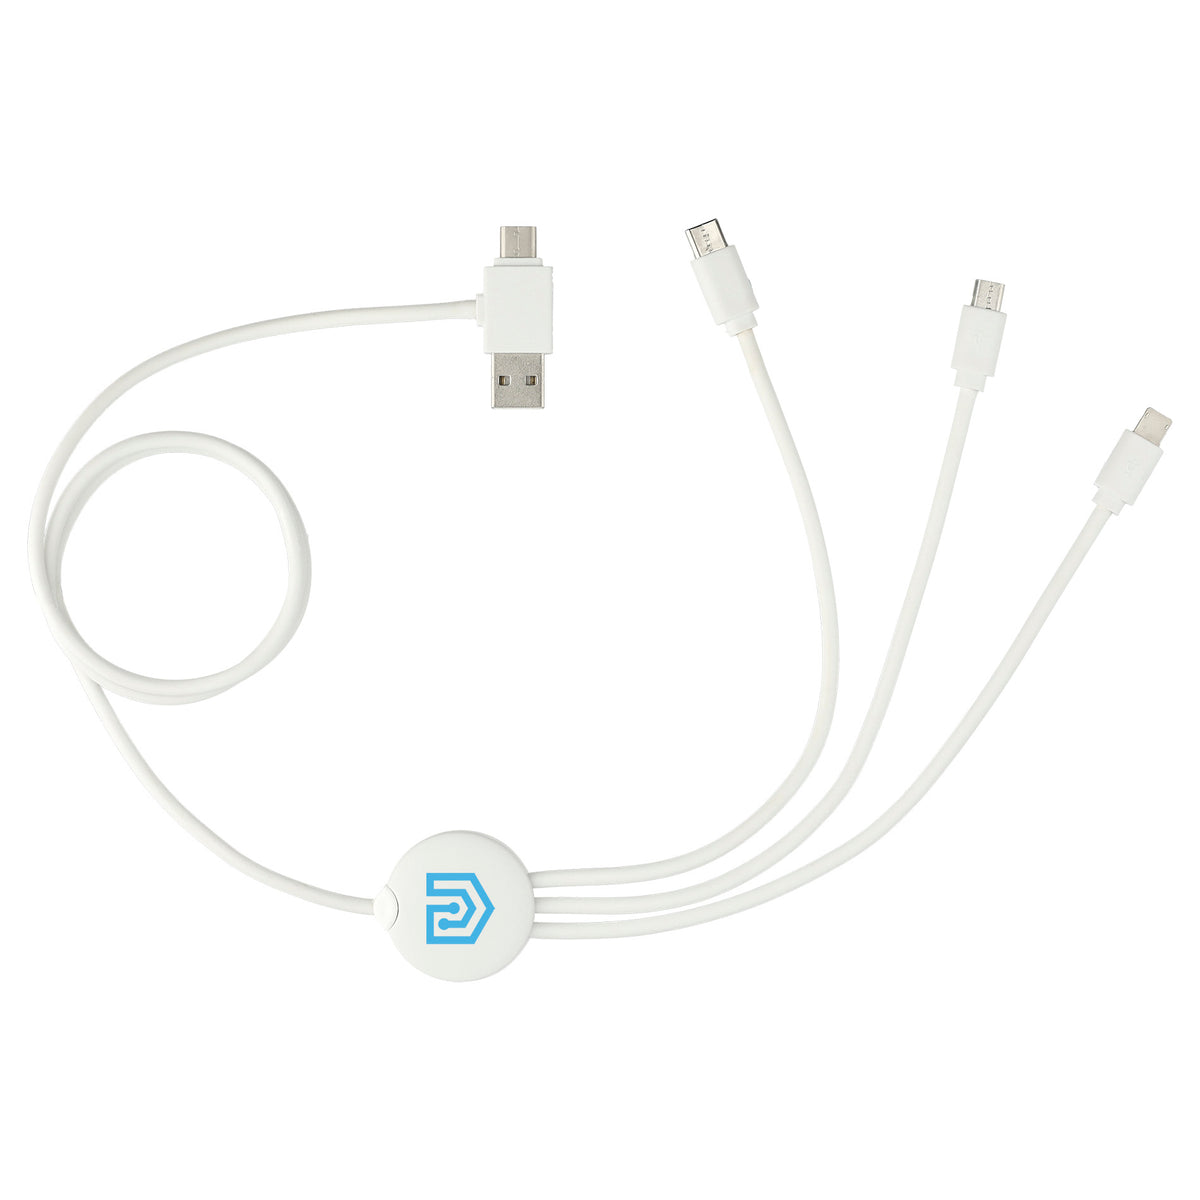 5-in-1 Charging Cable with Antimicrobial Additives